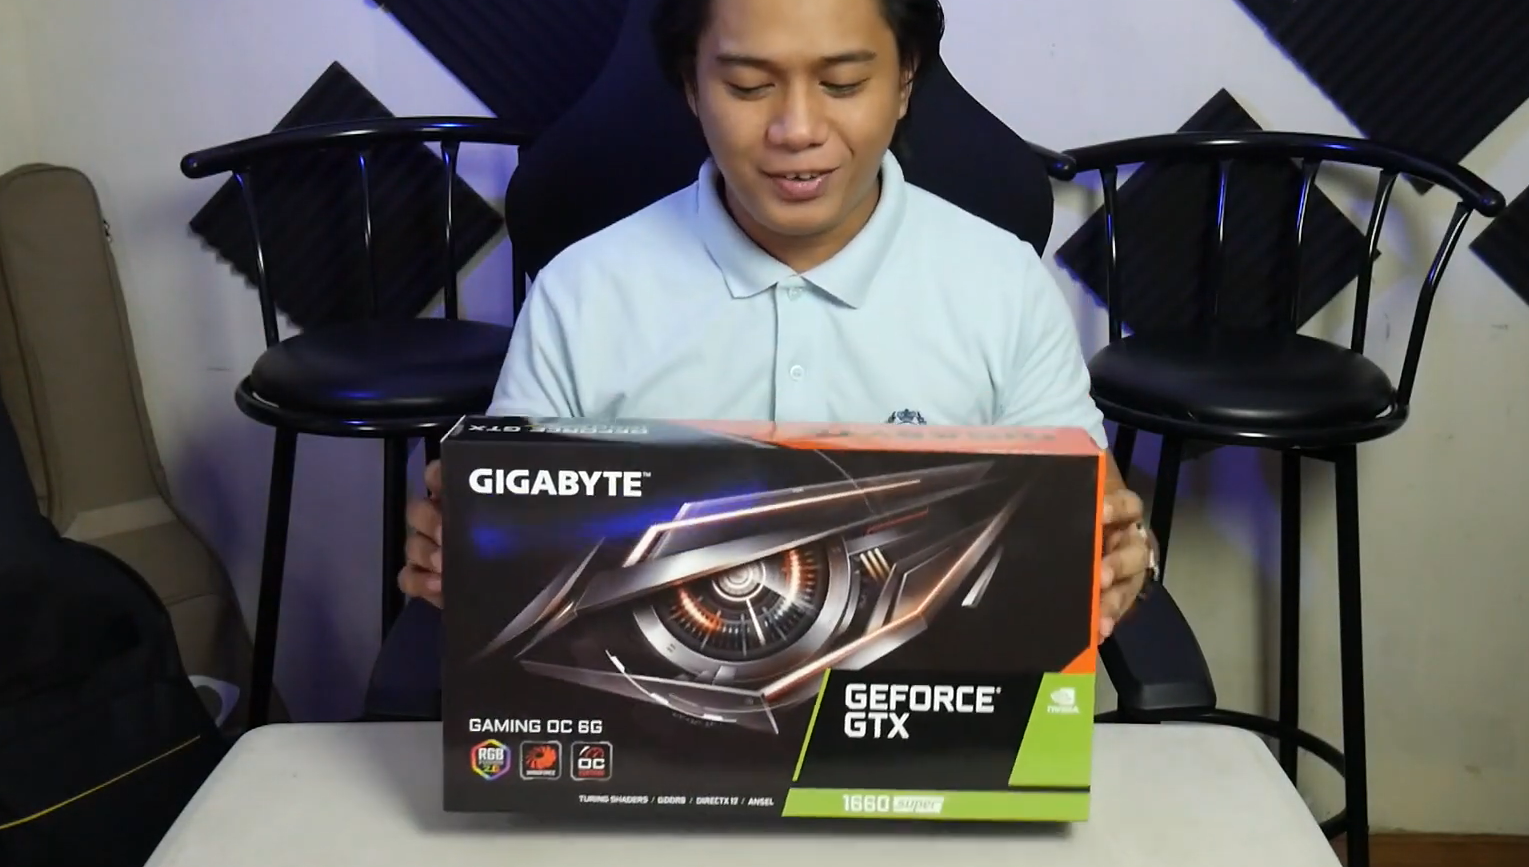 [Member Submission] Unboxing and Benchmark: GIGABYTE GTX 1660 Super